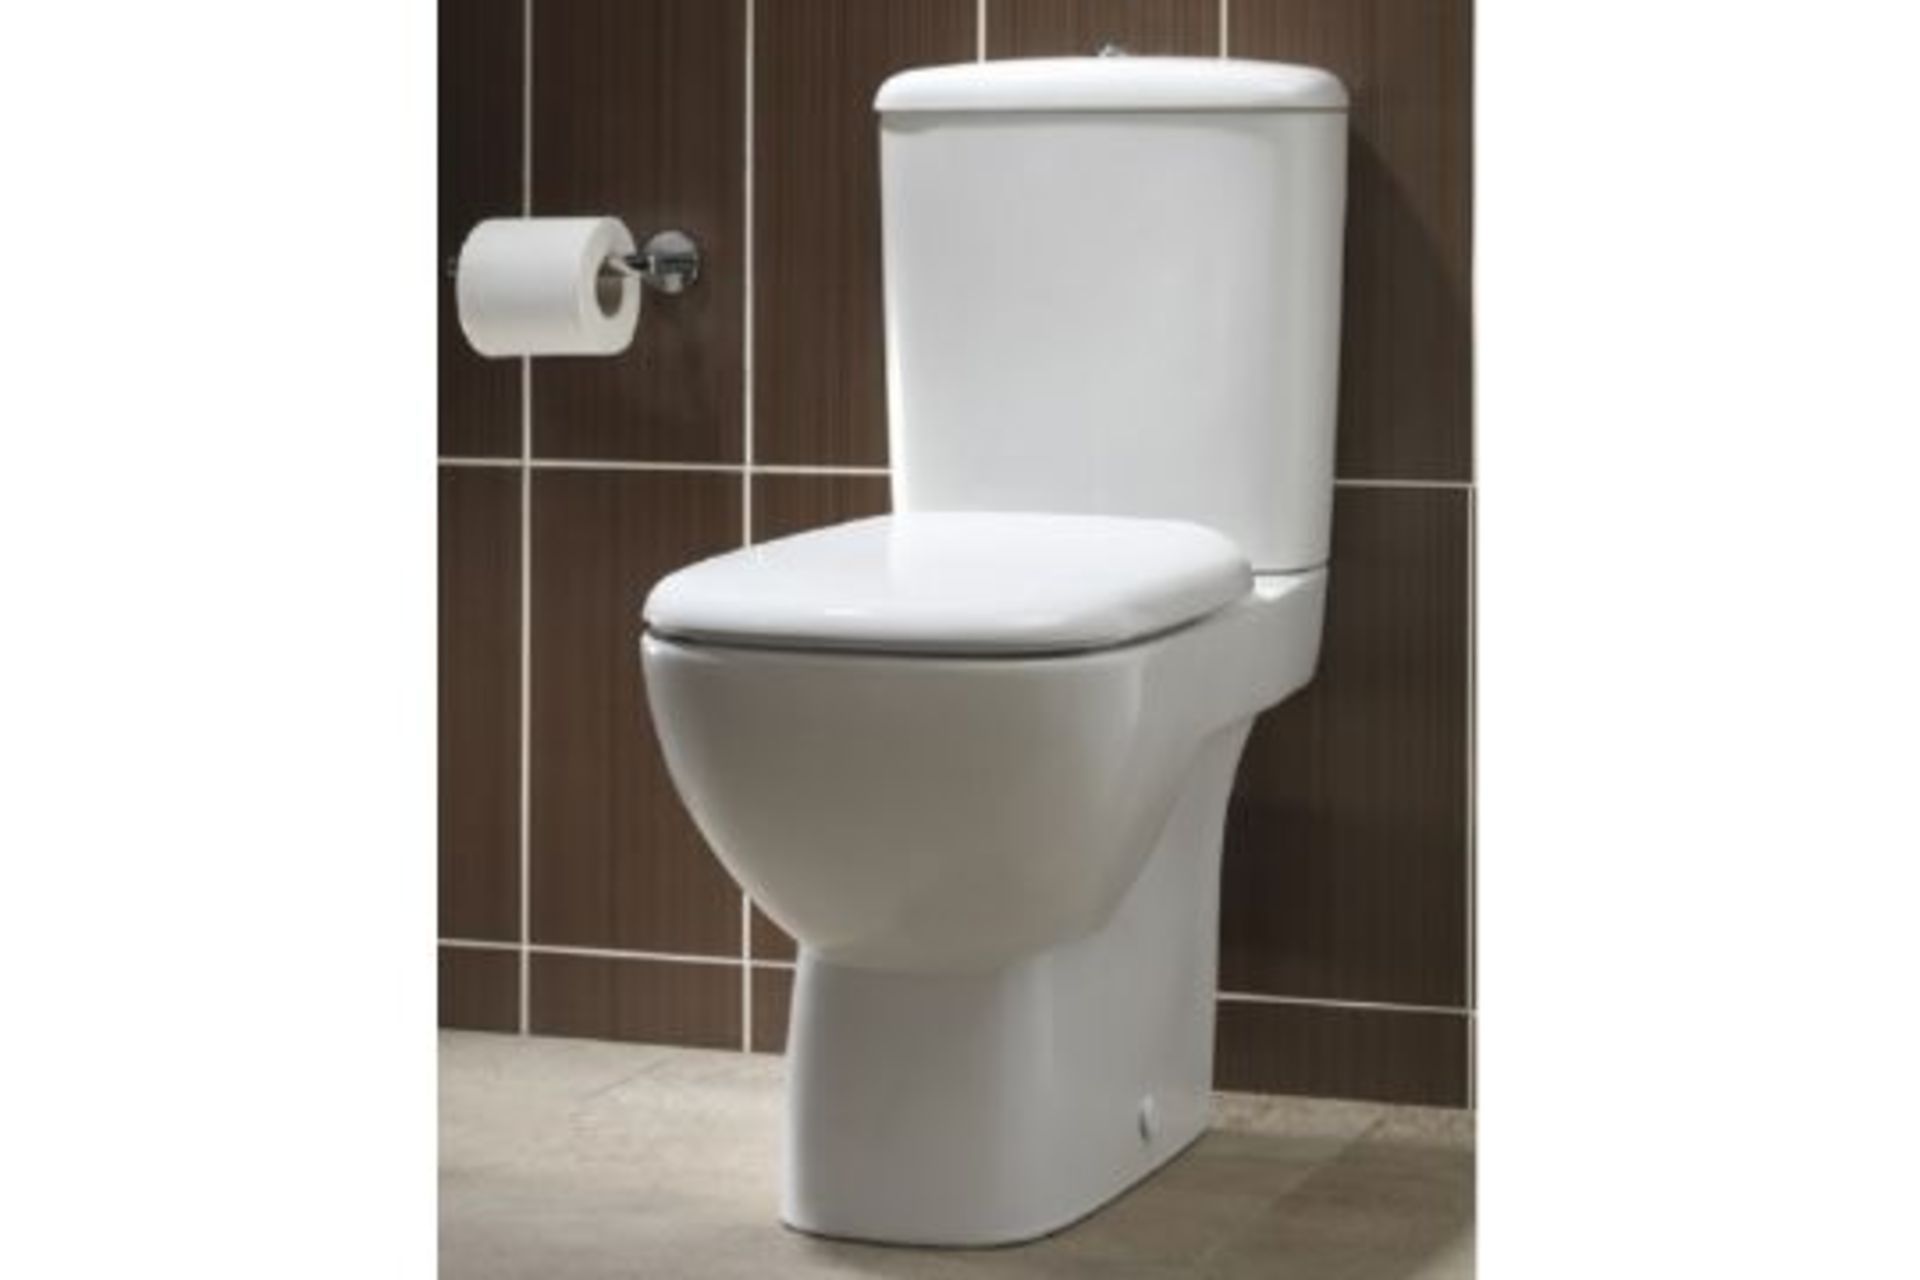 New Twyford Moda Close Coupled WC Rrp £636.99.The Moda Close Coupled Toilet Is A Stylish And E...